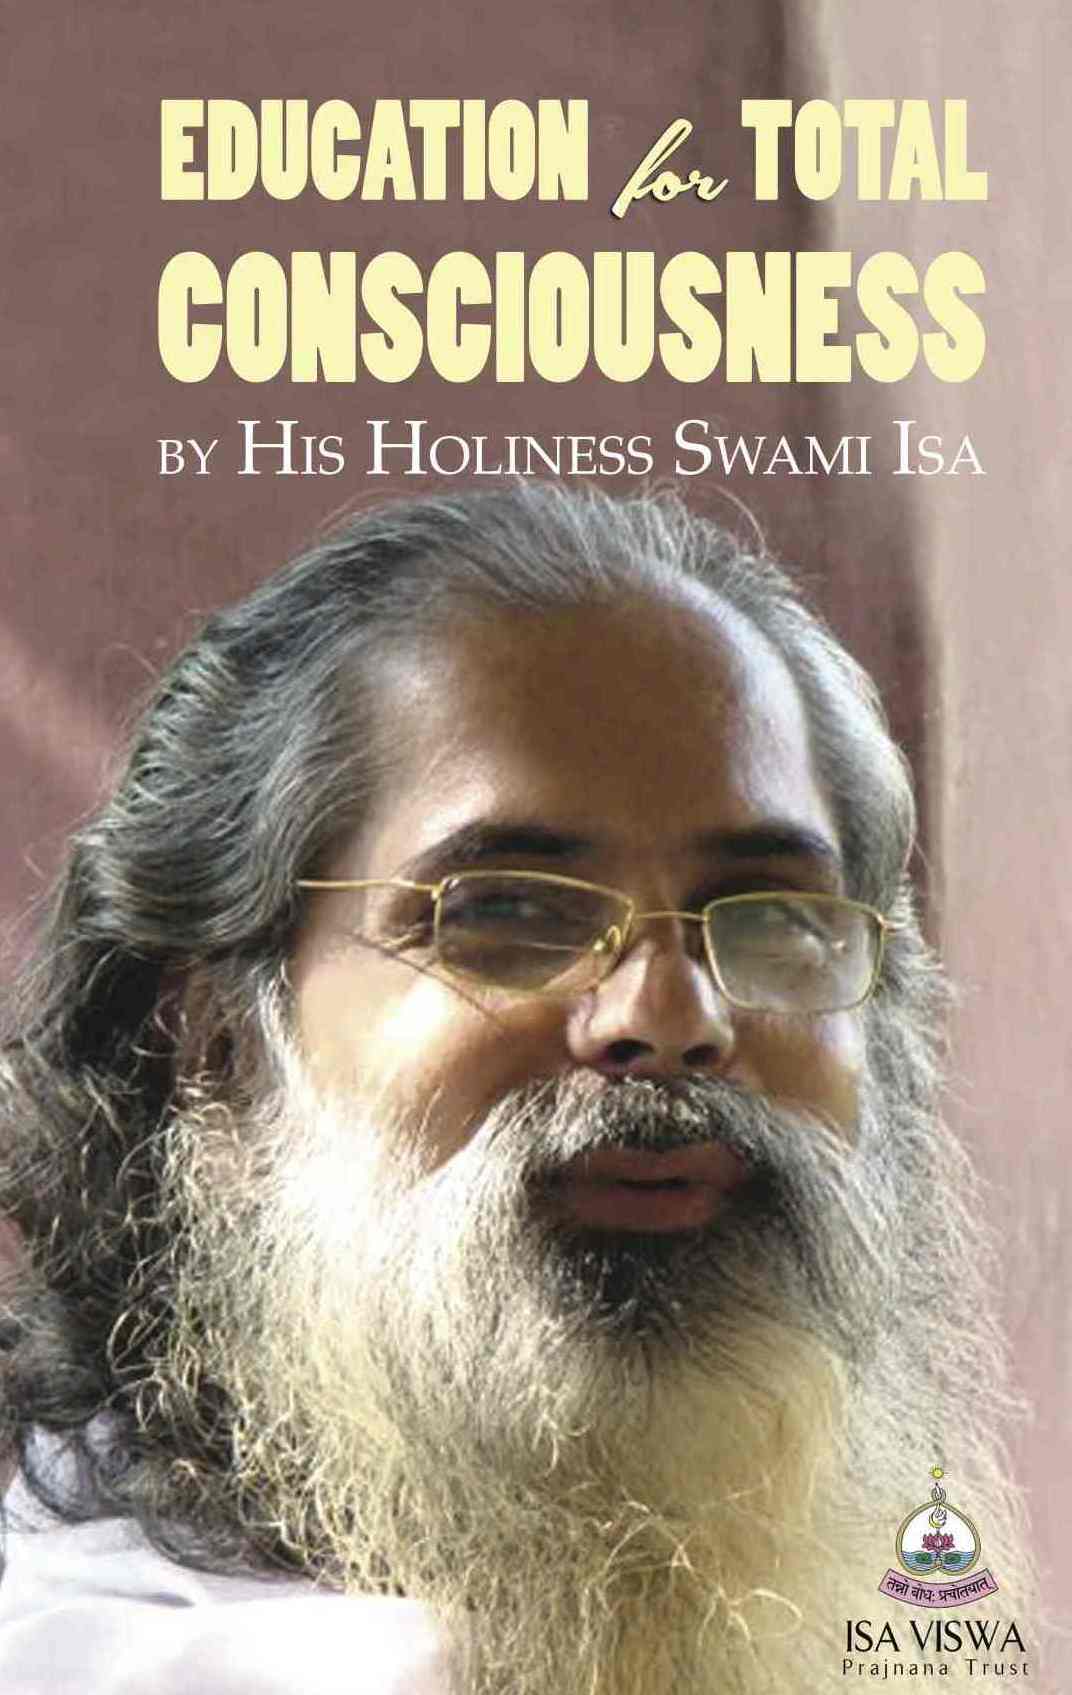 Education for Total Consciousness book by Swami Isa